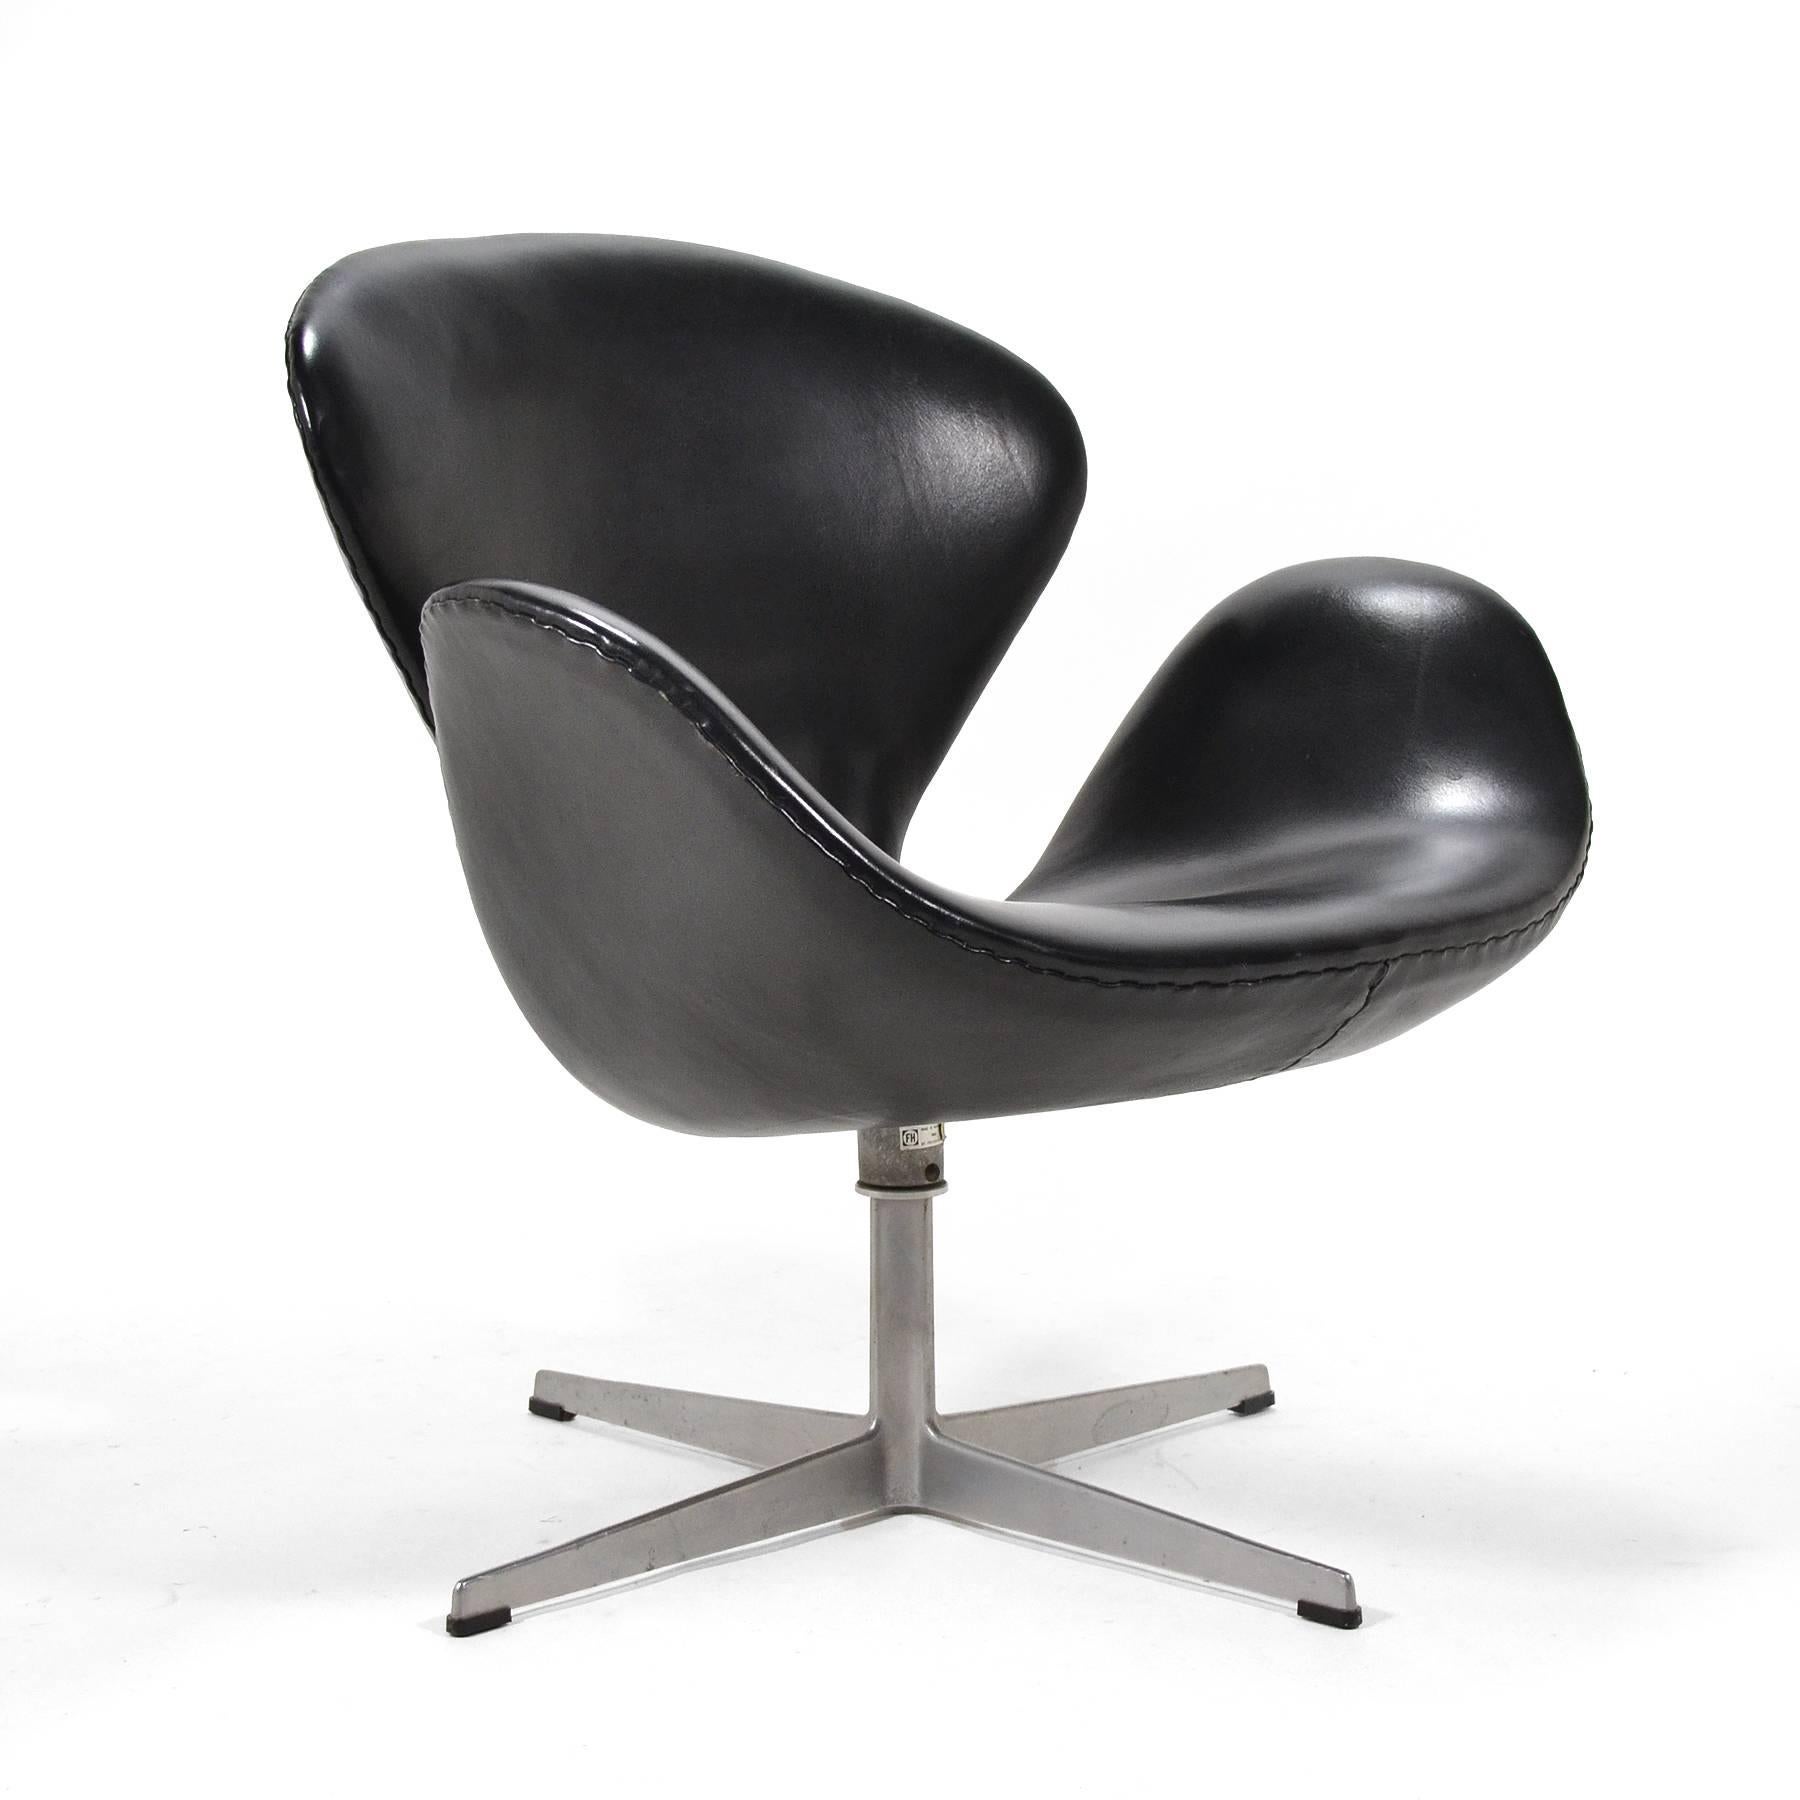 Jacobsen's iconic design upholstered in rich black leather. 